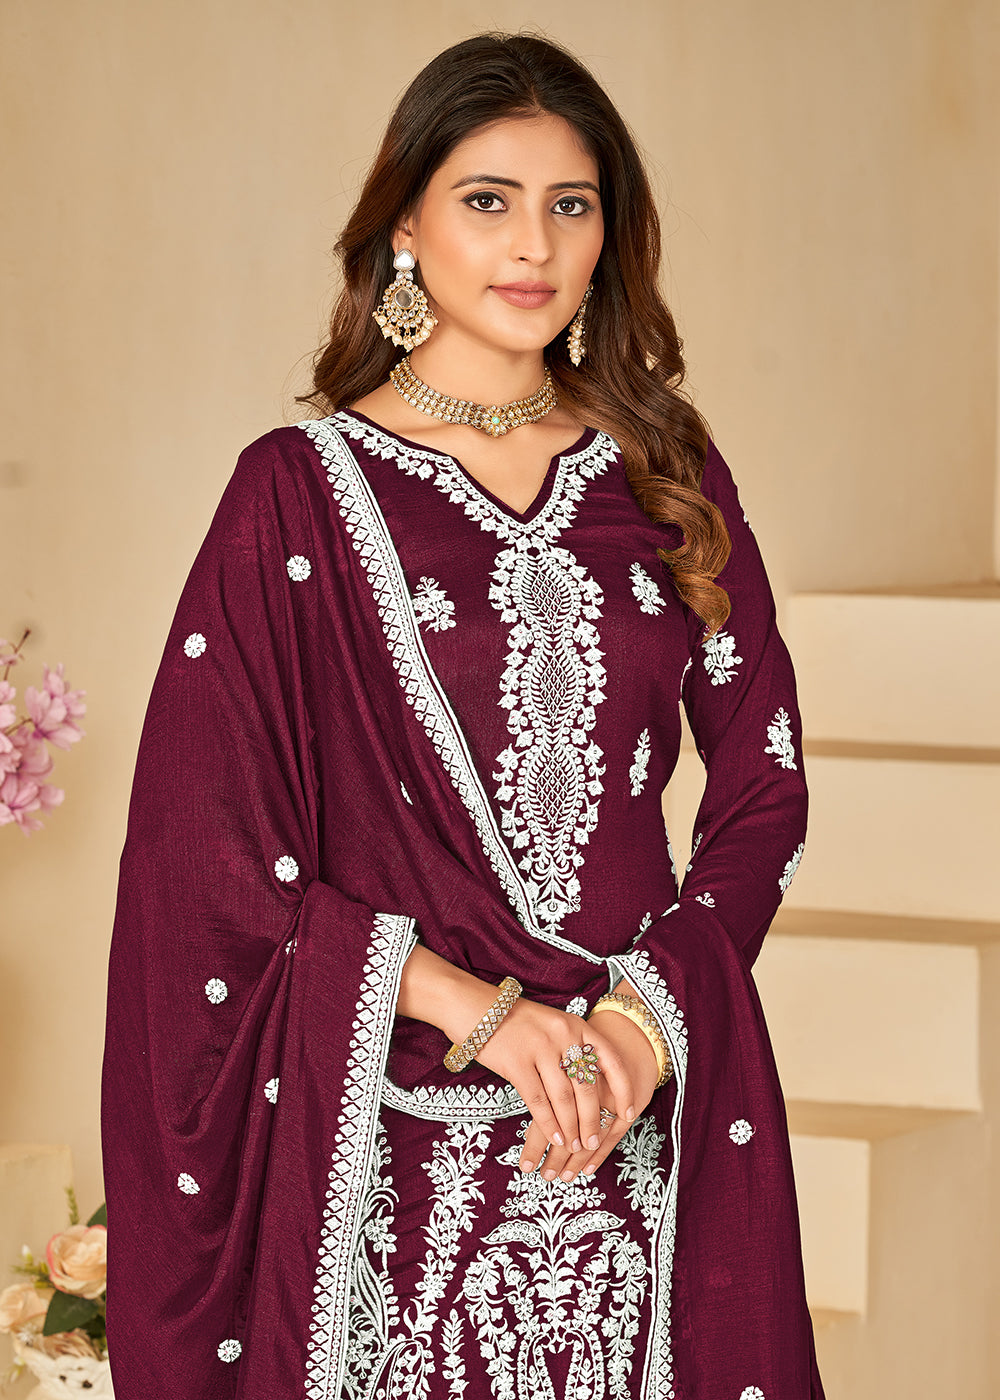 Buy Now Art Silk Pretty Wine Embroidered Palazzo Style Suit Online in USA, UK, Canada, Germany, Australia & Worldwide at Empress Clothing. 